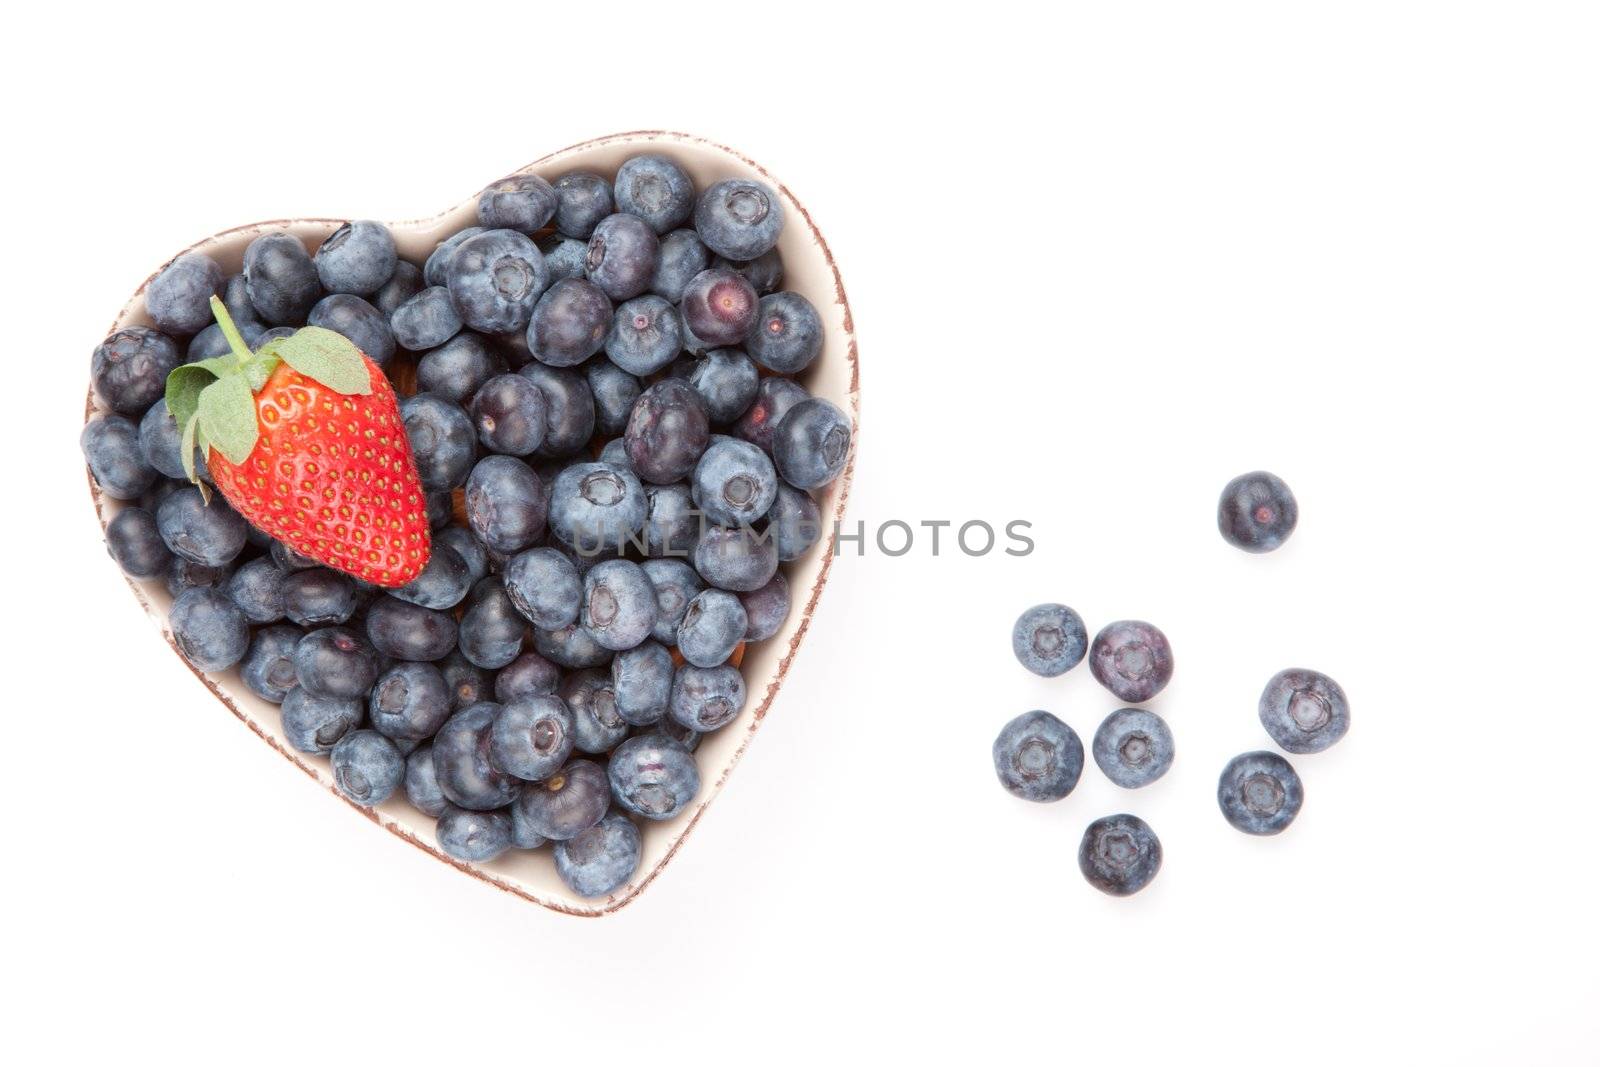 One strawberry and bluberries in a heart shaped bowl against a white background